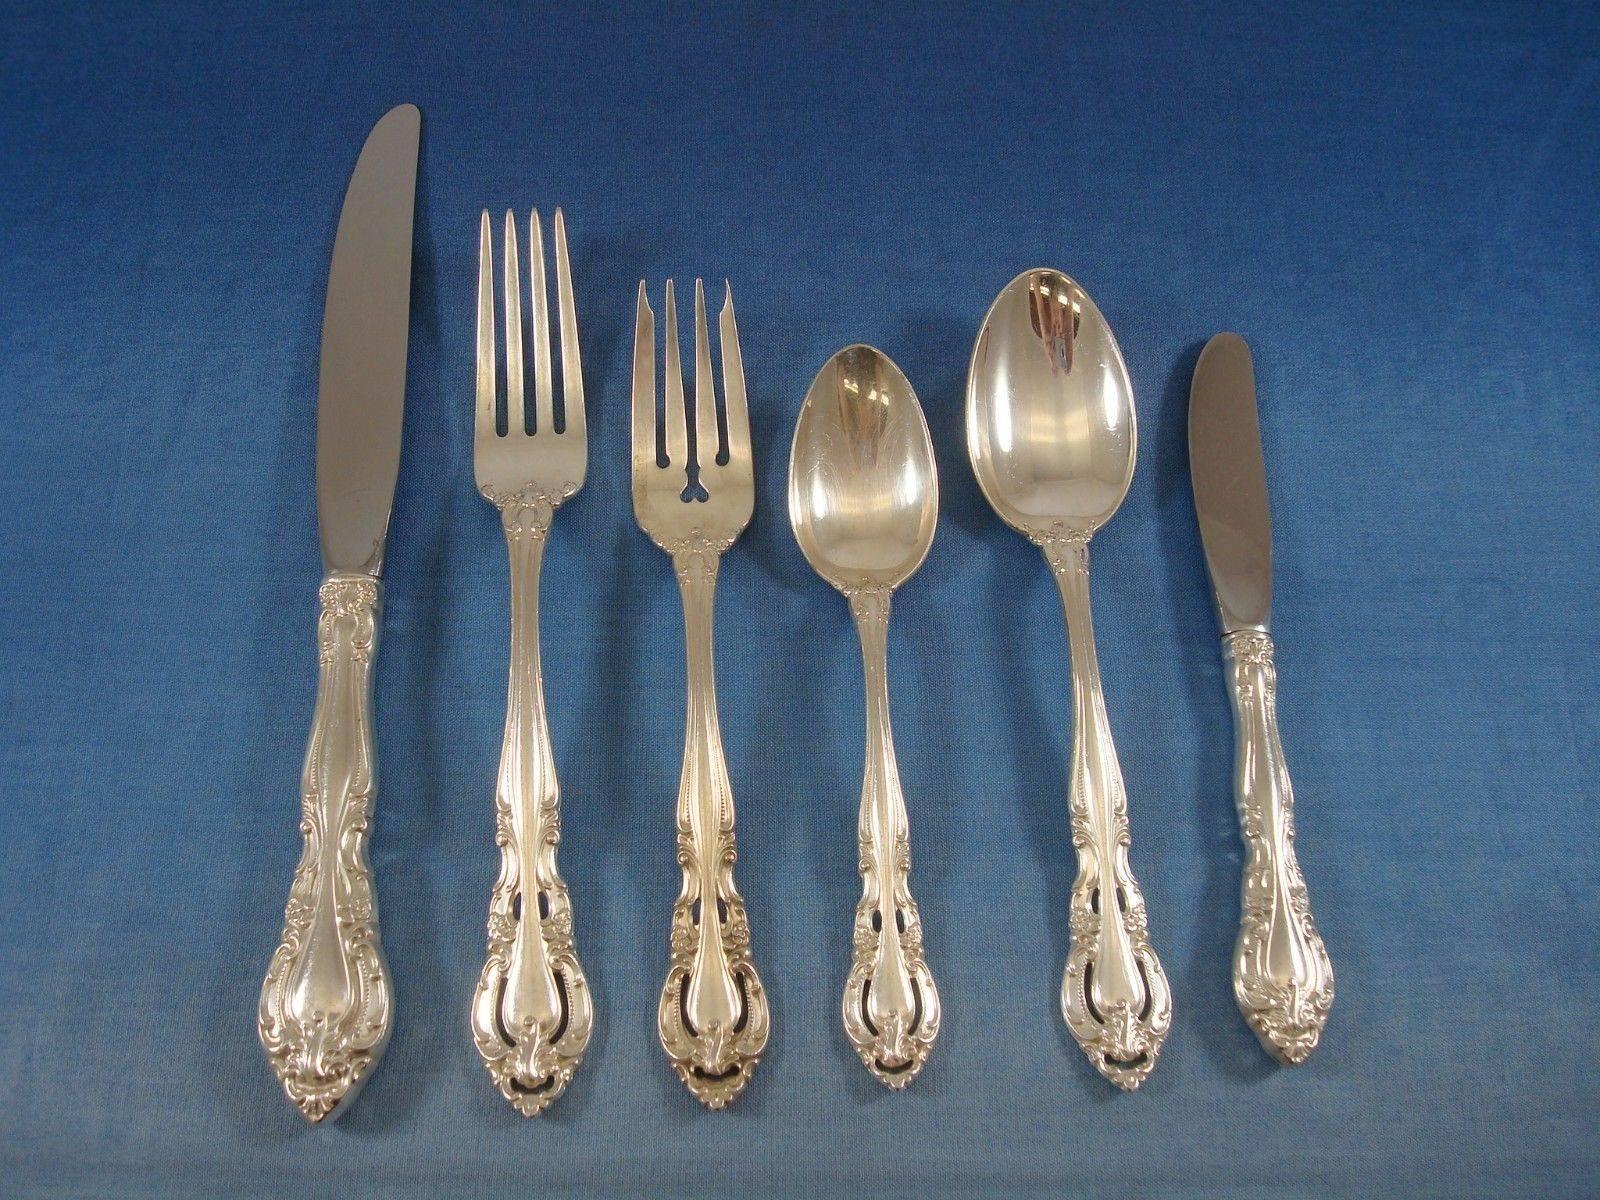 19th Century Baronial by Gorham Sterling Silver 8 Luncheon Service Flatware Set of 52 Pieces